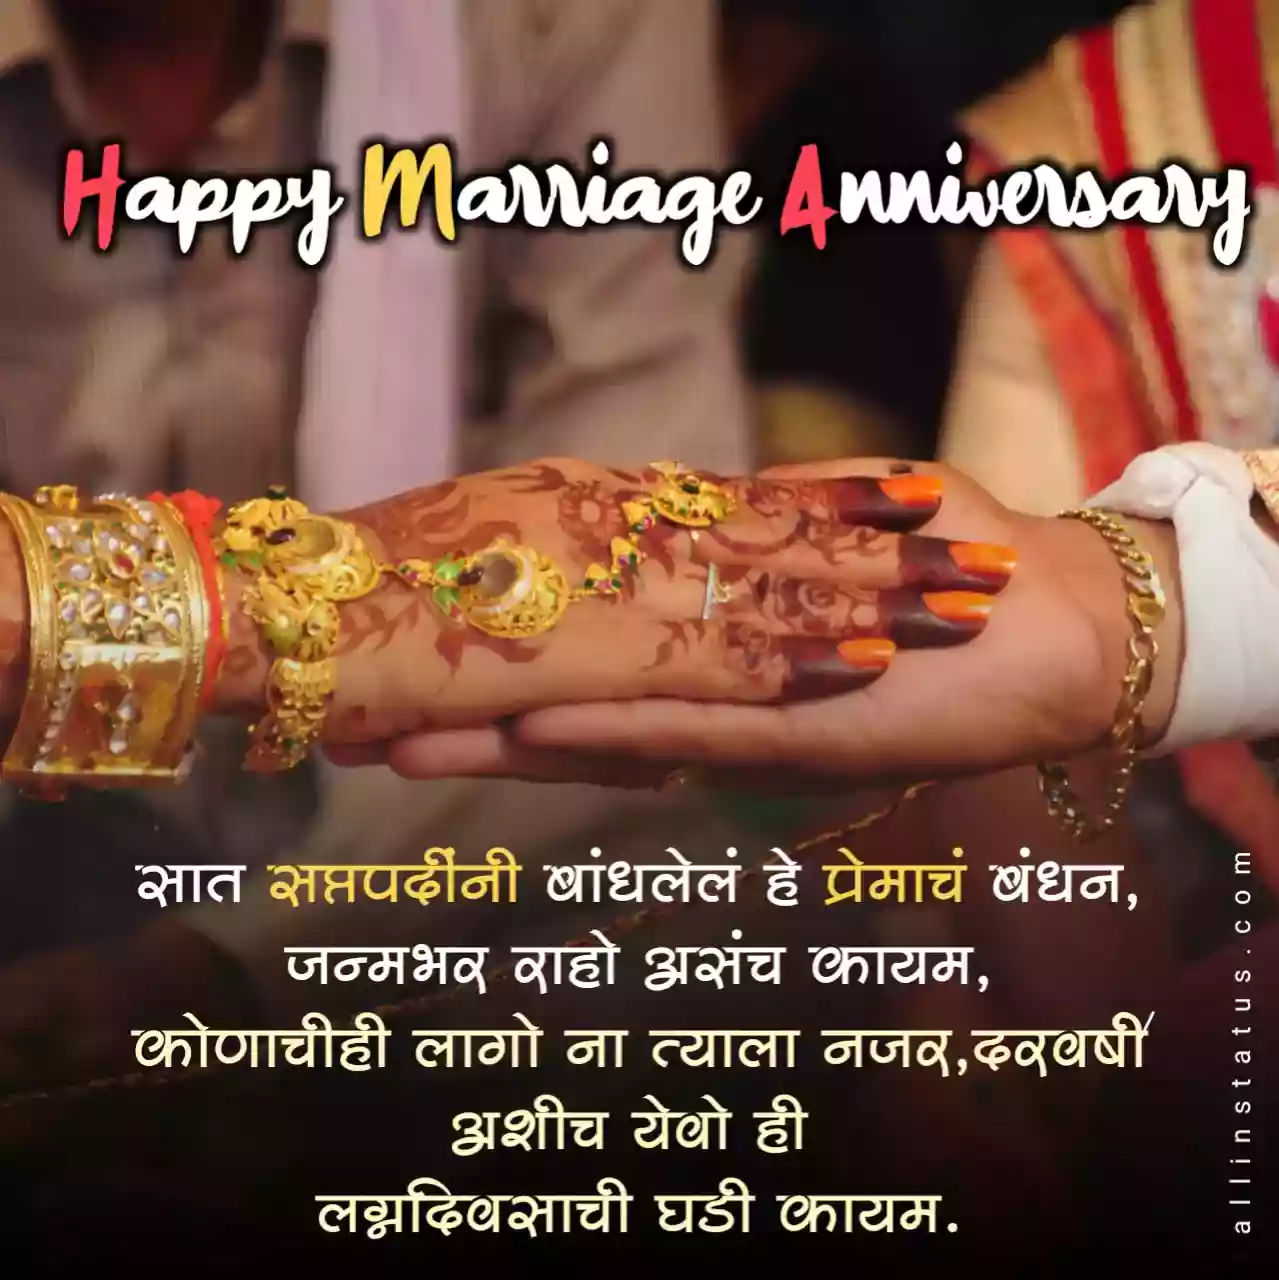 Marriage Anniversary images In Marathi